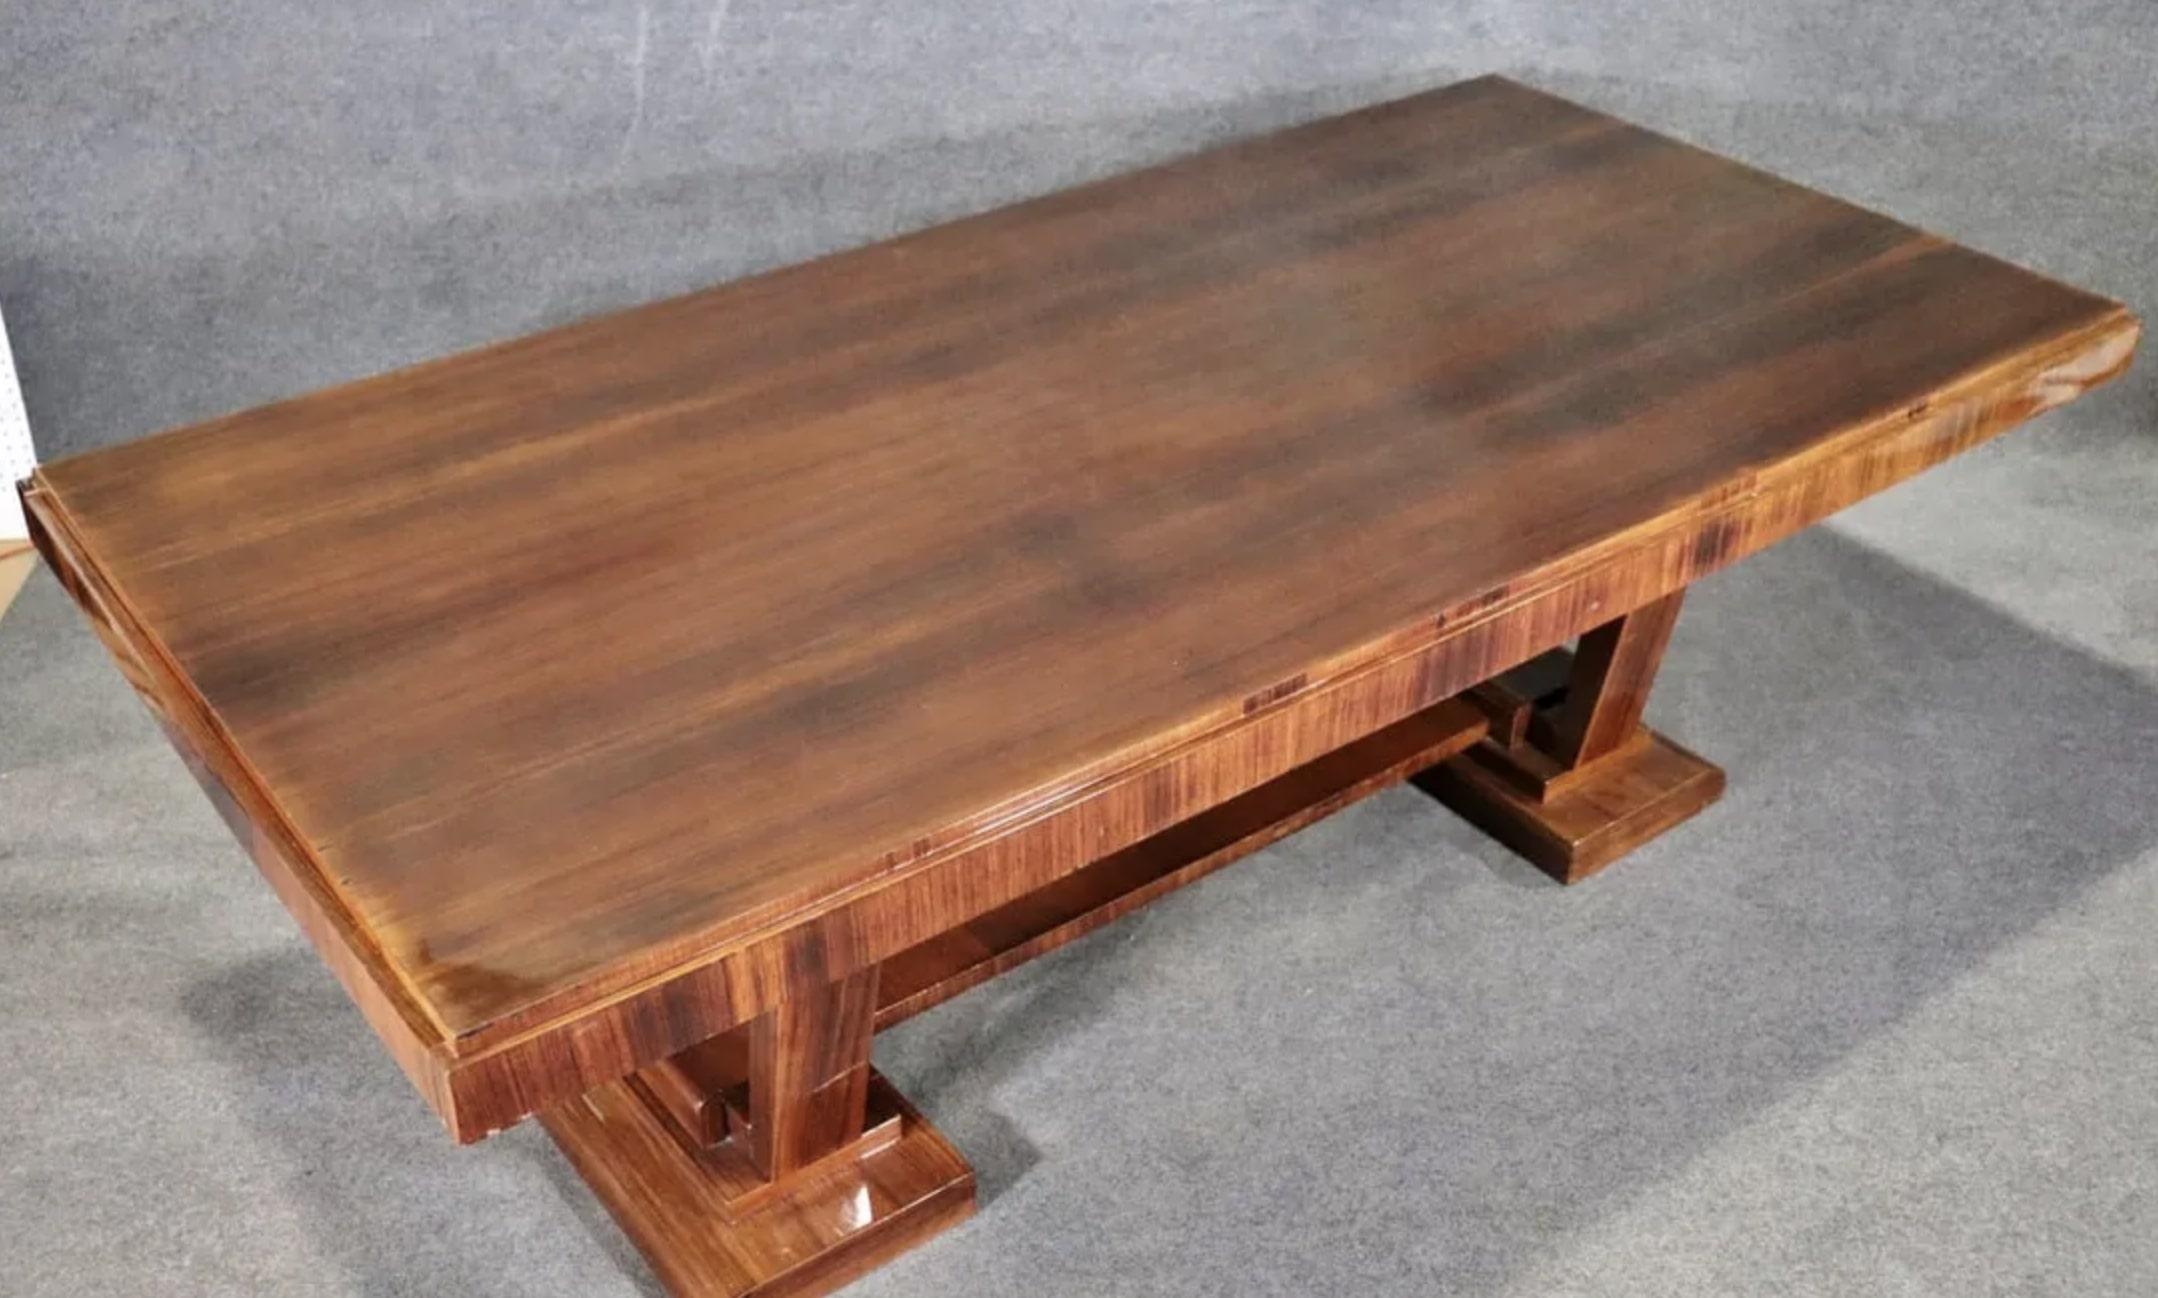 Long dining table in rich rosewood grain and trestle base. Two additional 17 3/4